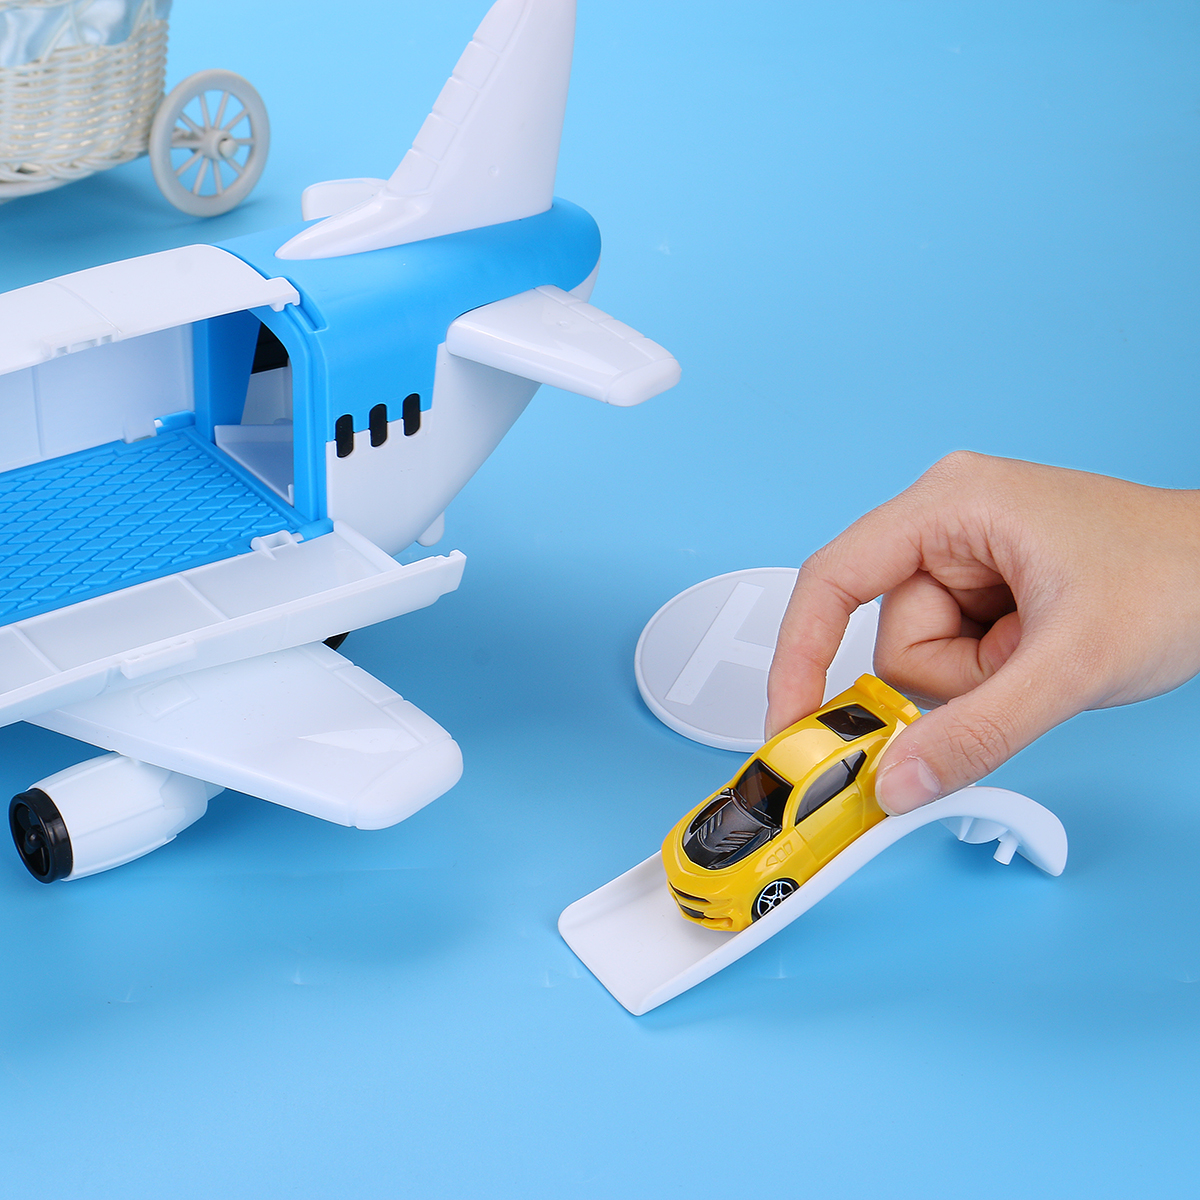 Storage-Transport-Aircraft-Model-Inertia-Diecast-Model-Car-Set-Toy-for-Childrens-Gift-1621631-7